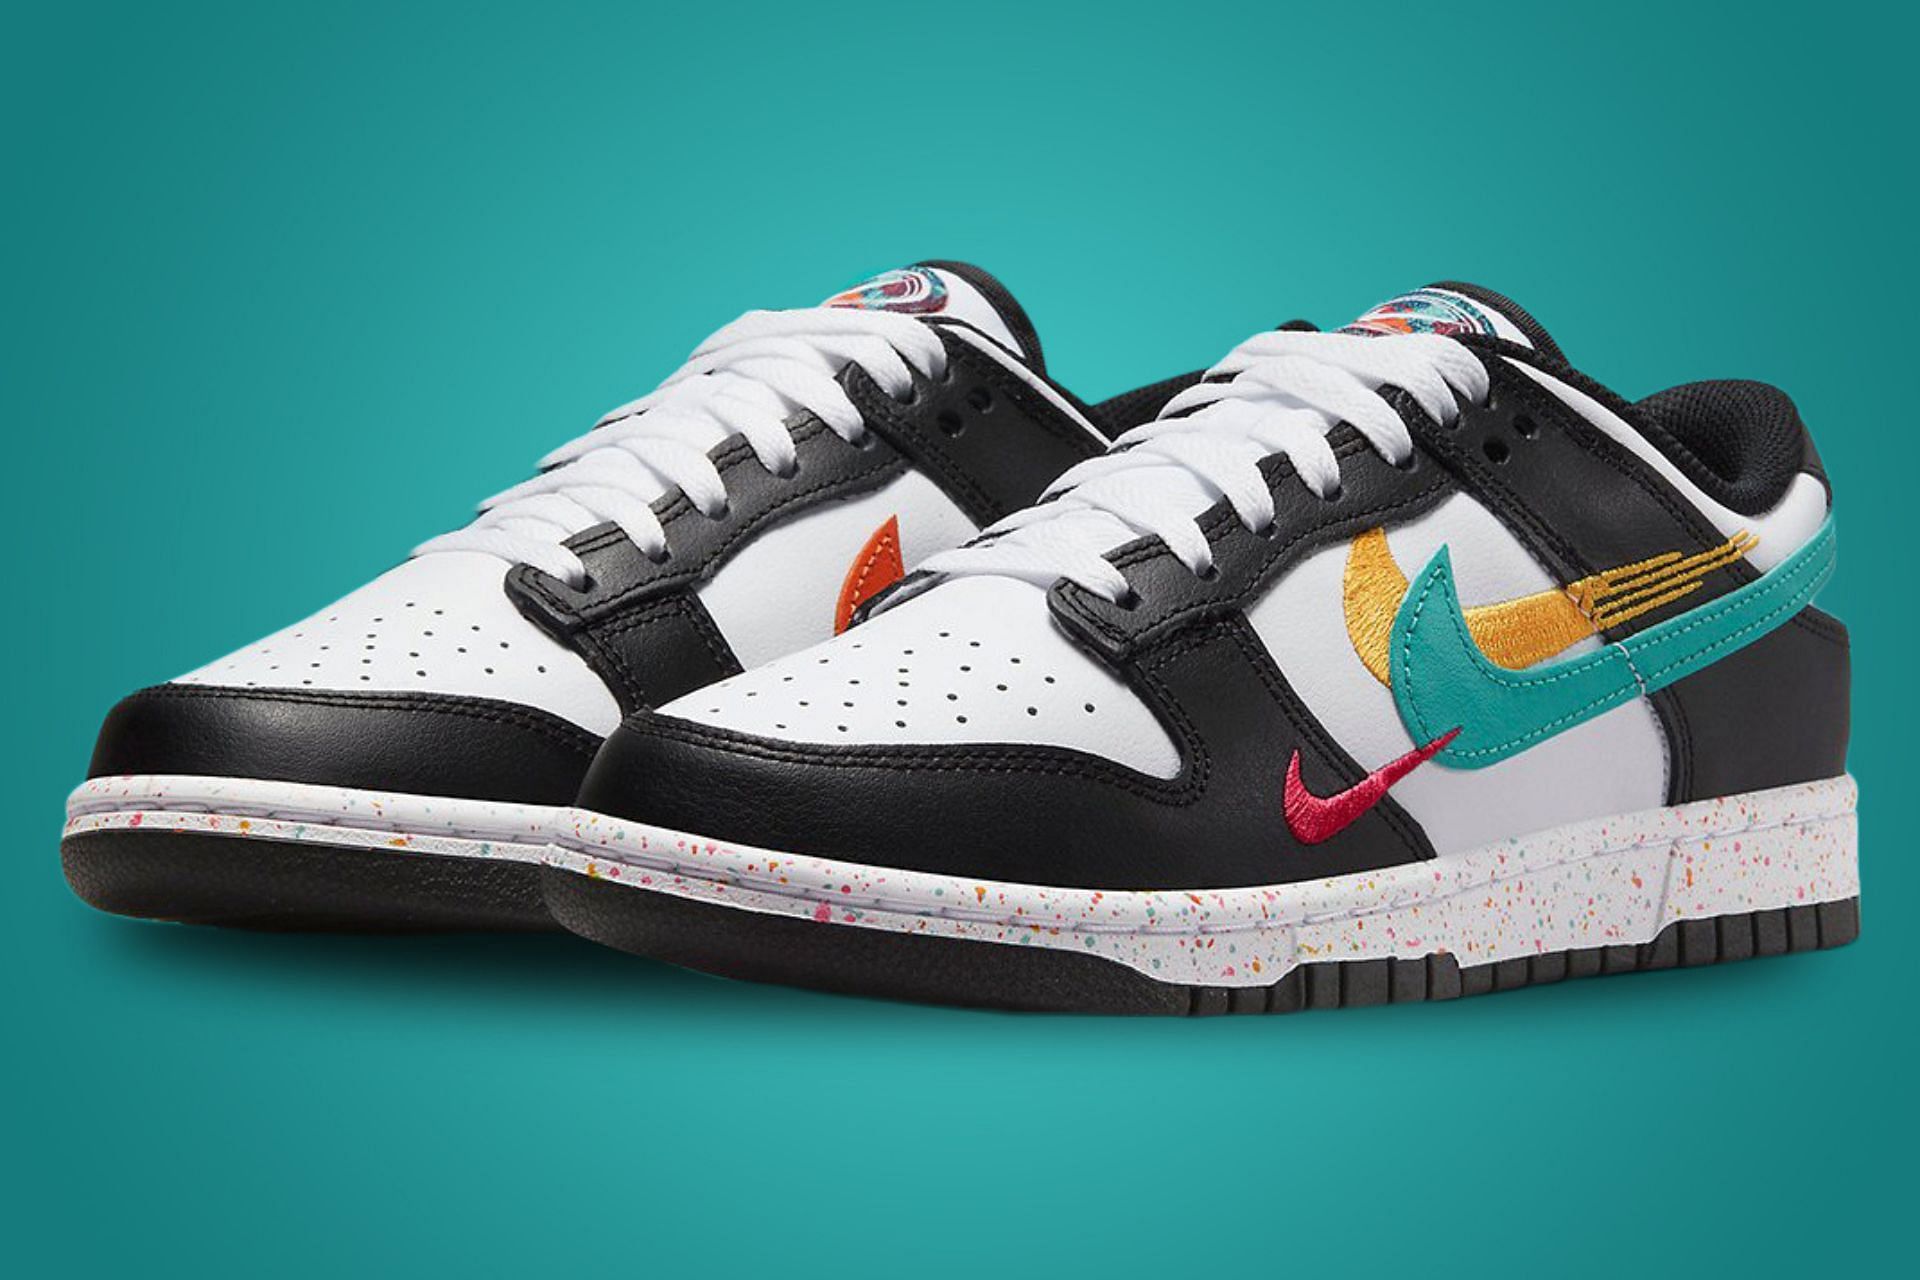 Where to buy Nike Dunk Low “Multicolor Swoosh” shoes? Price and more ...